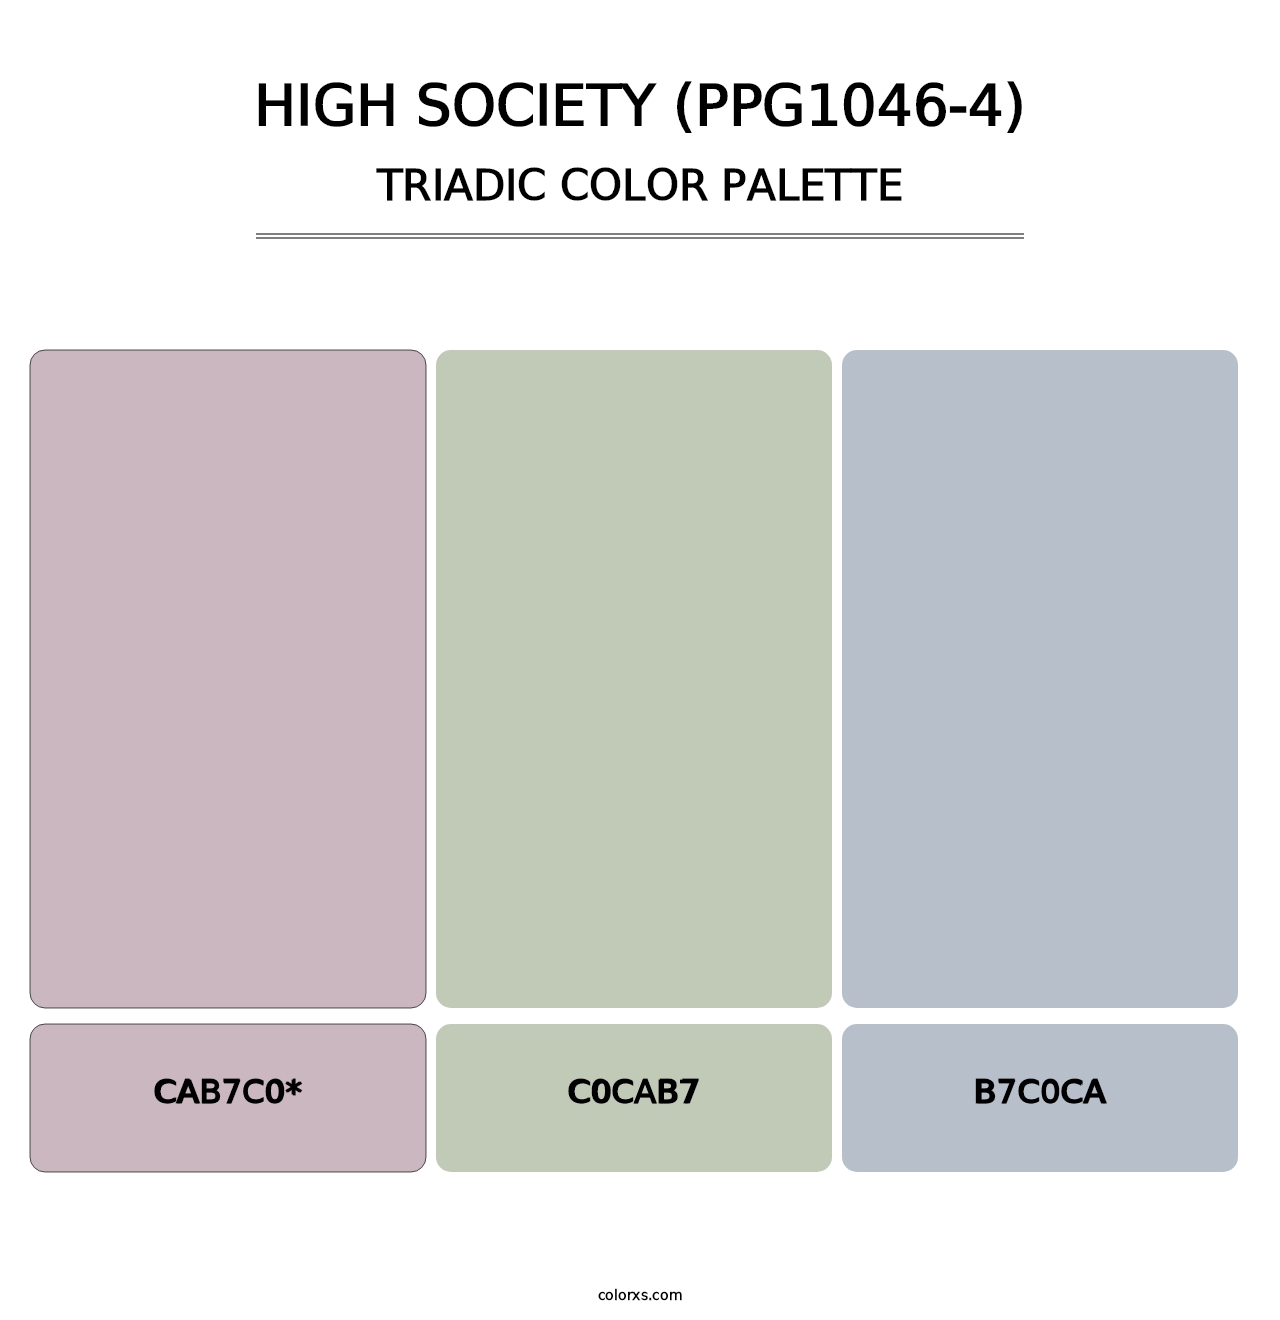 High Society (PPG1046-4) - Triadic Color Palette